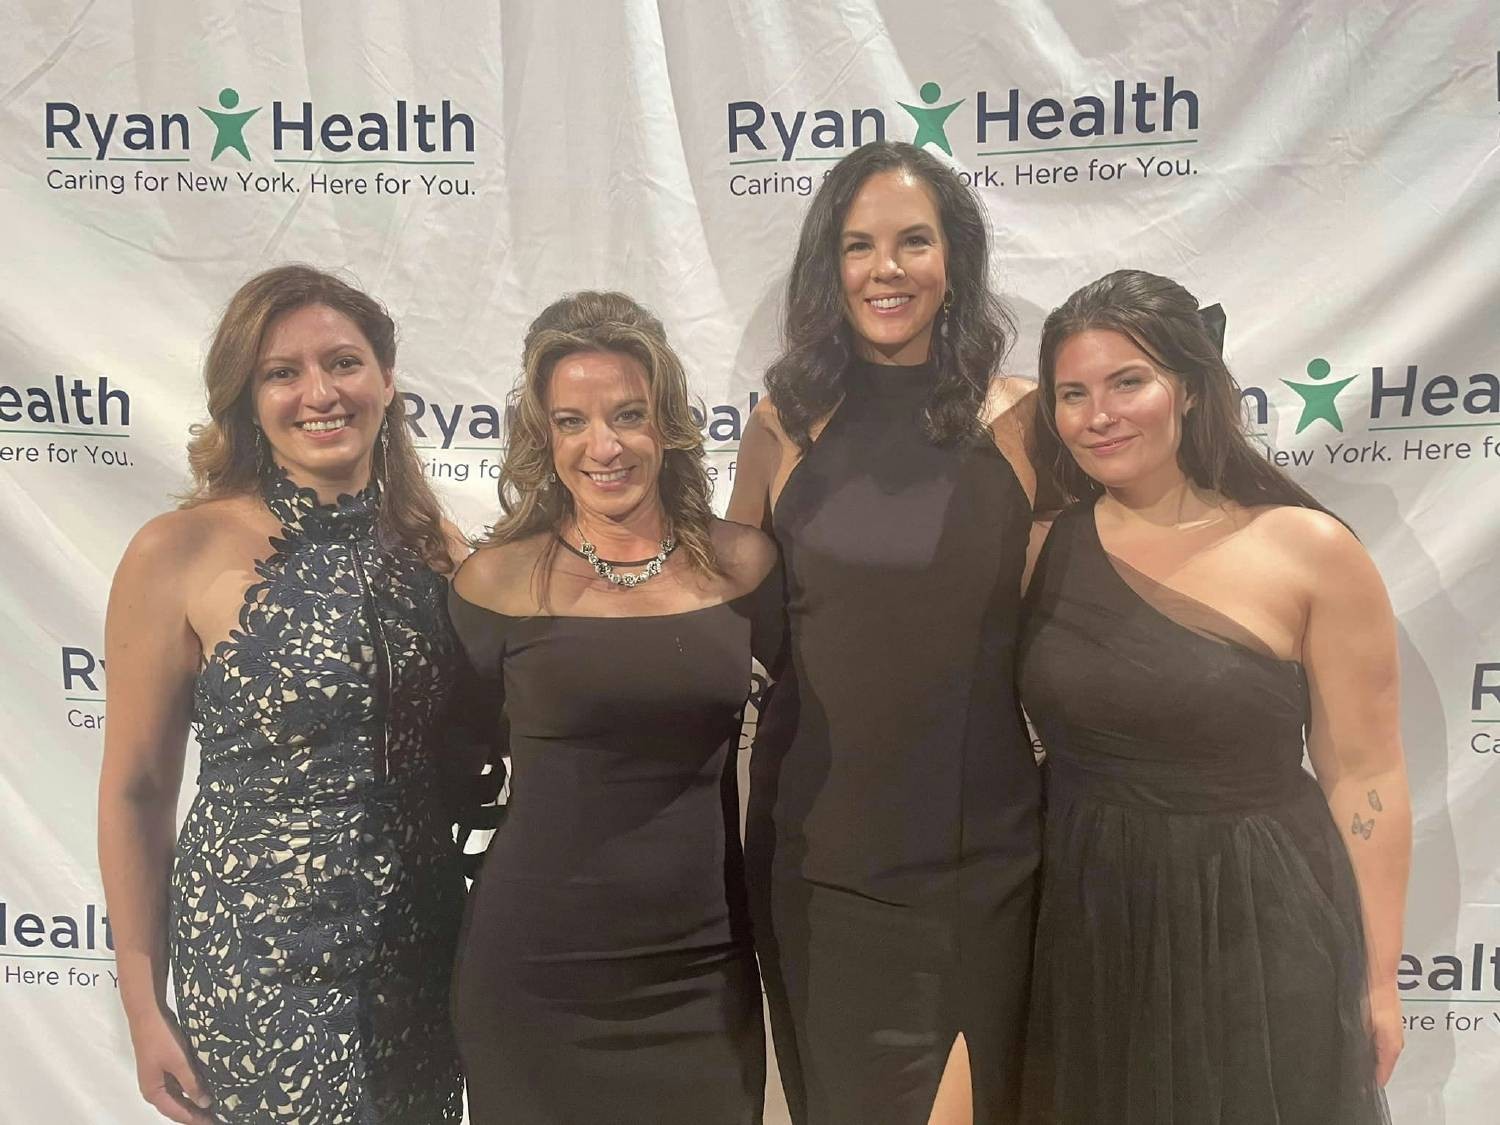 Our CEO and members of our leadership team attending the Ryan Health Gala.